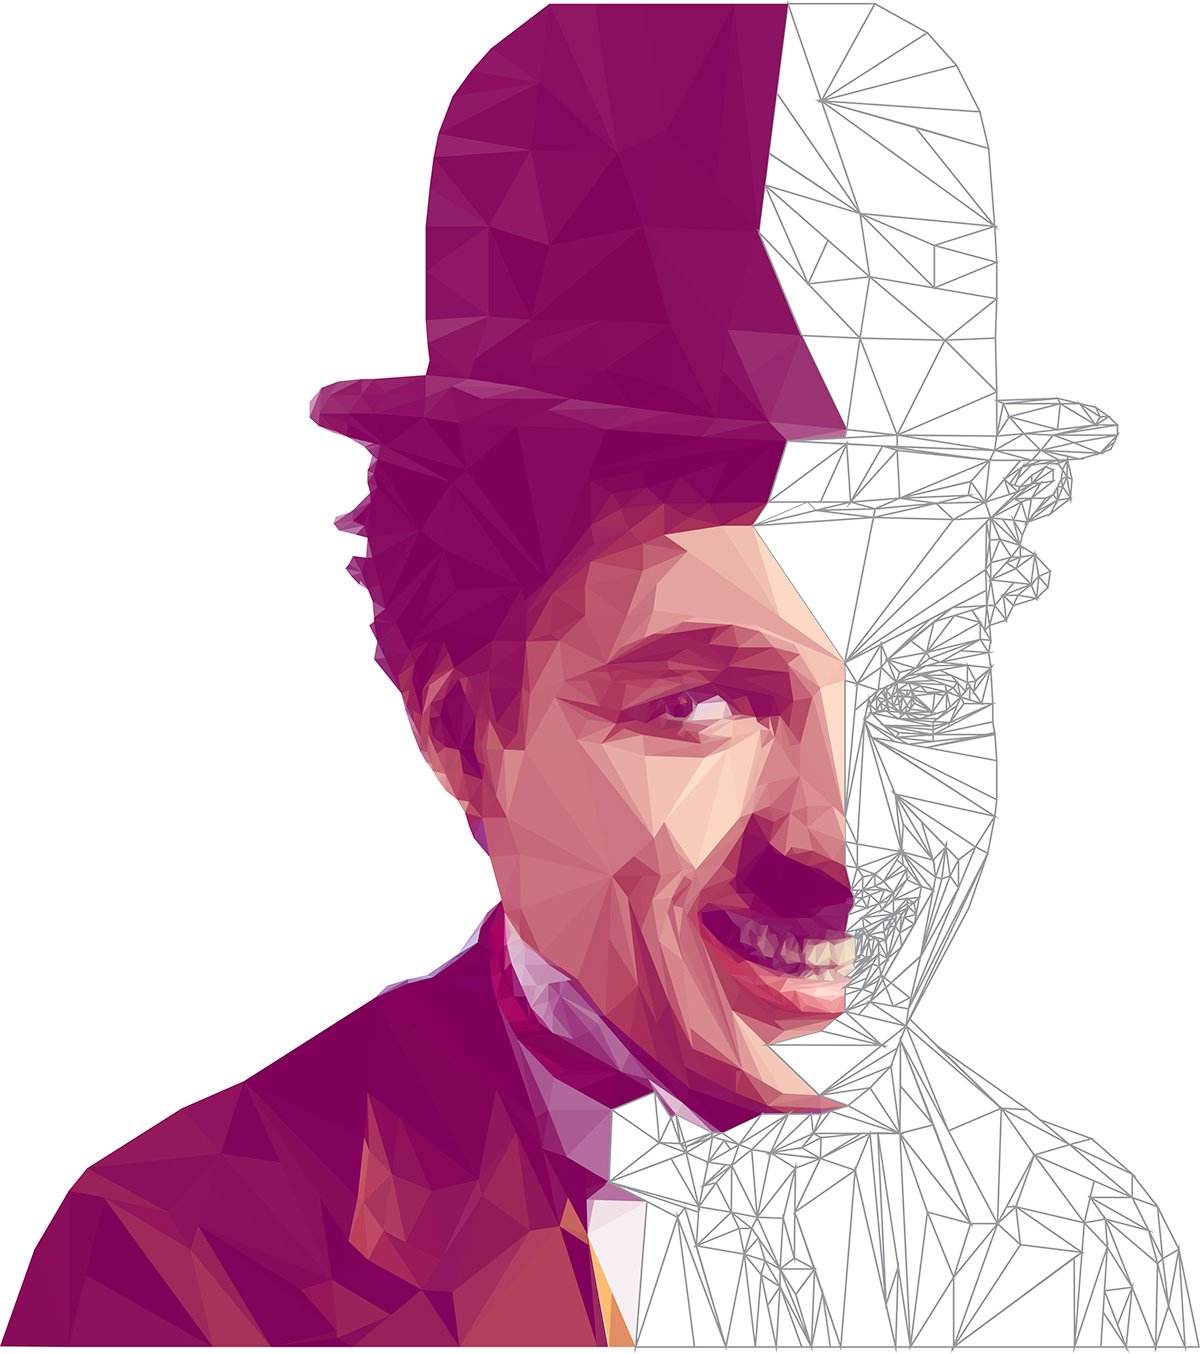 Charles Chaplin - Low Poly High Poly Portrait